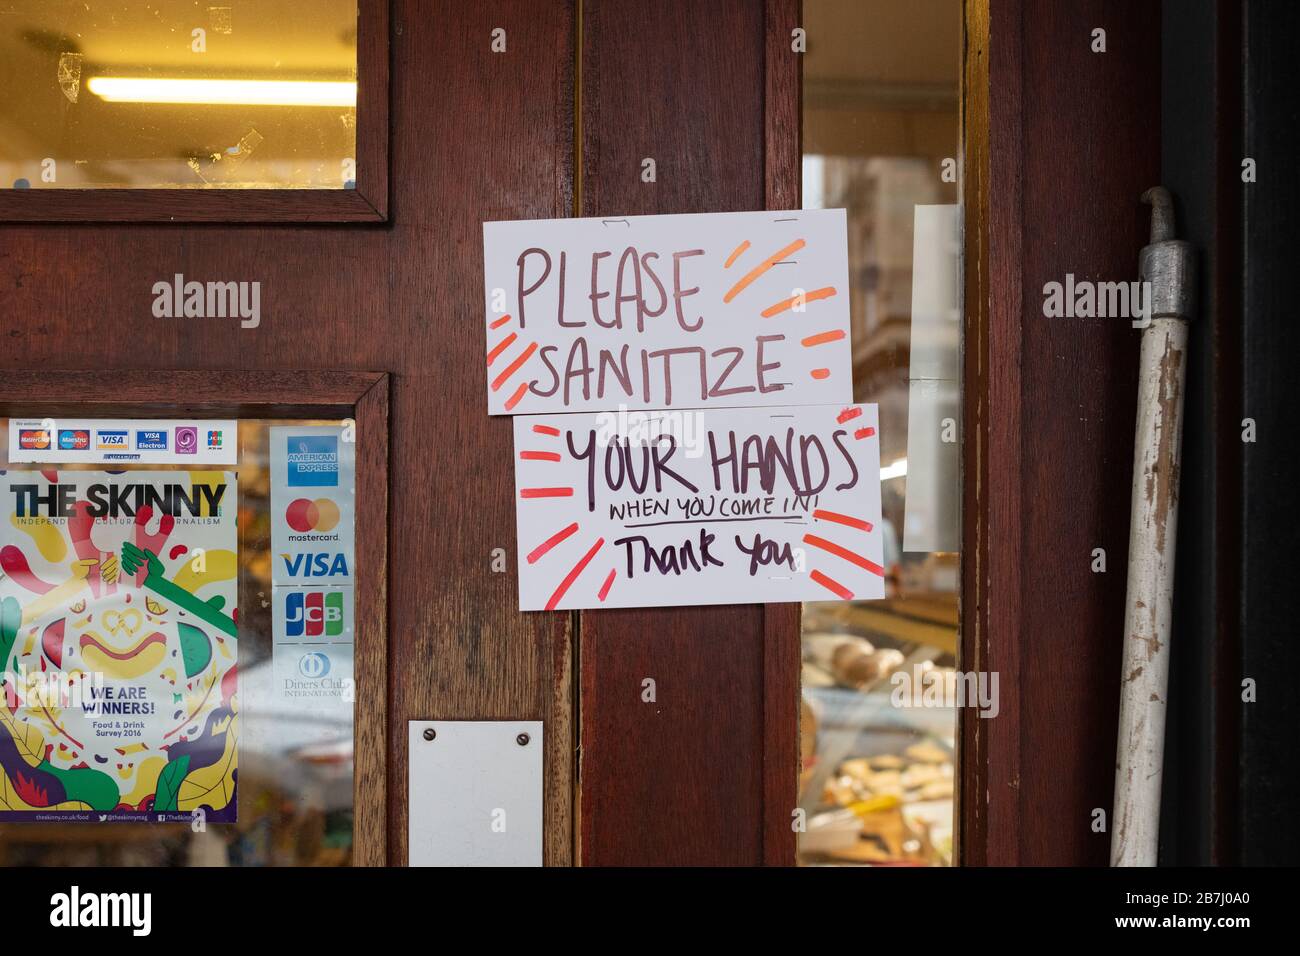 Finnieston, Glasgow, Scotland, UK - Roots, Fruits and Flowers, Finnieston, Glasgow, display a 'Please Sanitize Yours Hands when you come in' on the door, and provide sanitizer just inside the door Credit: Kay Roxby/Alamy Live News Stock Photo